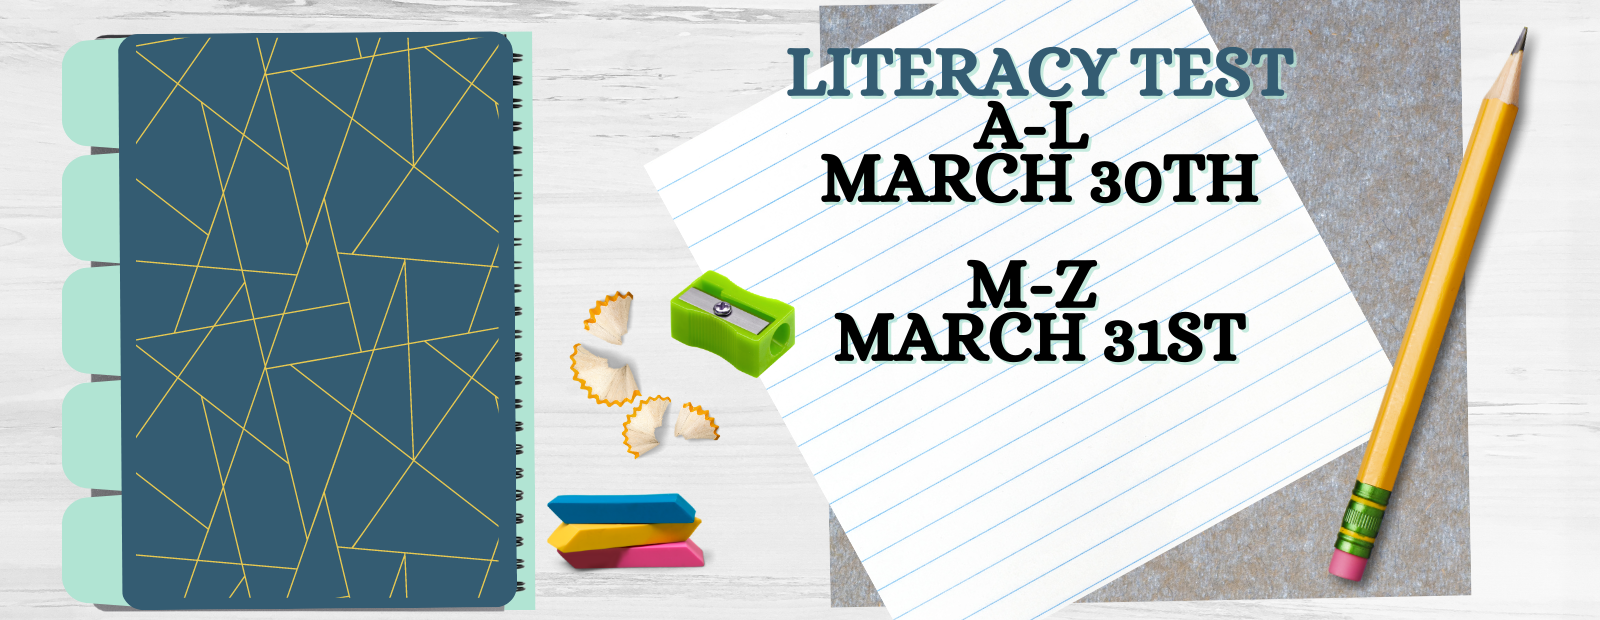 Literacy Test A to L March 30th M-Z March 31st